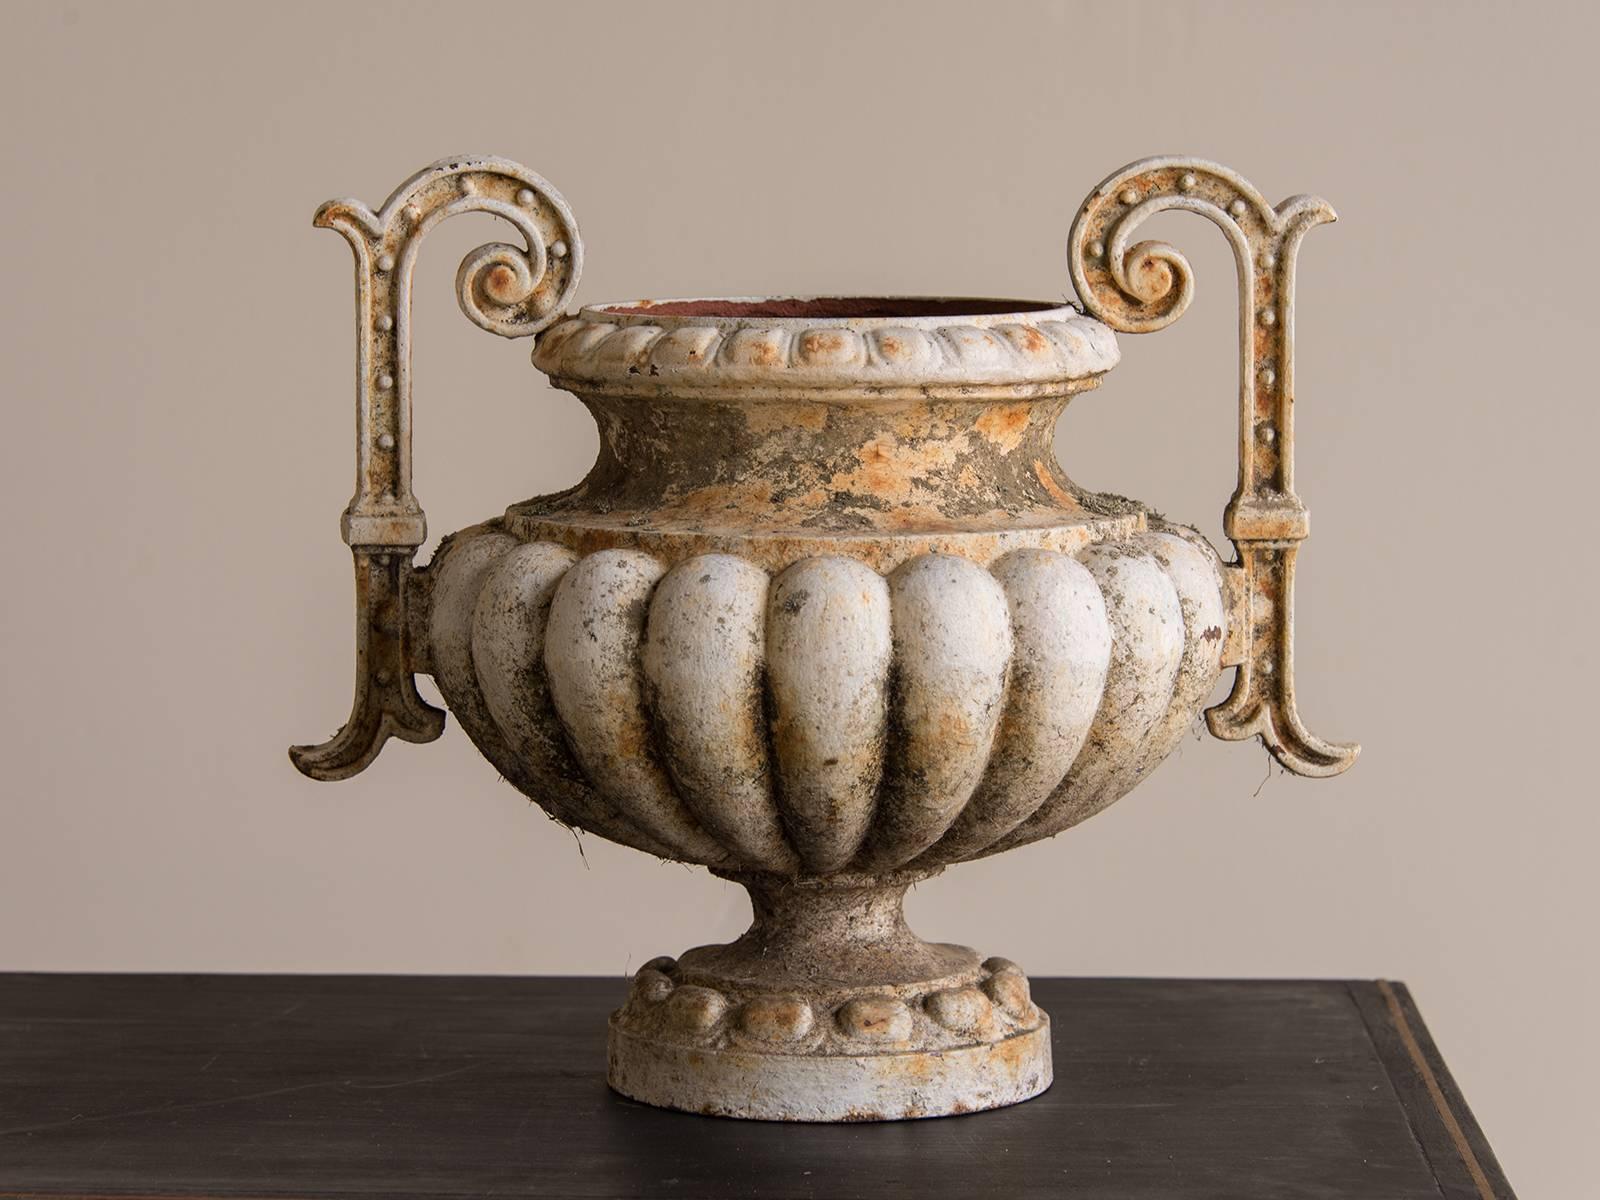 This pair of antique French iron garden urns are modeled after the famous example from the Alfred Corneau Foundry in Charleville, France. The distinctive lobed body is set upon a slender neck and circular base and features a pair of tall handles